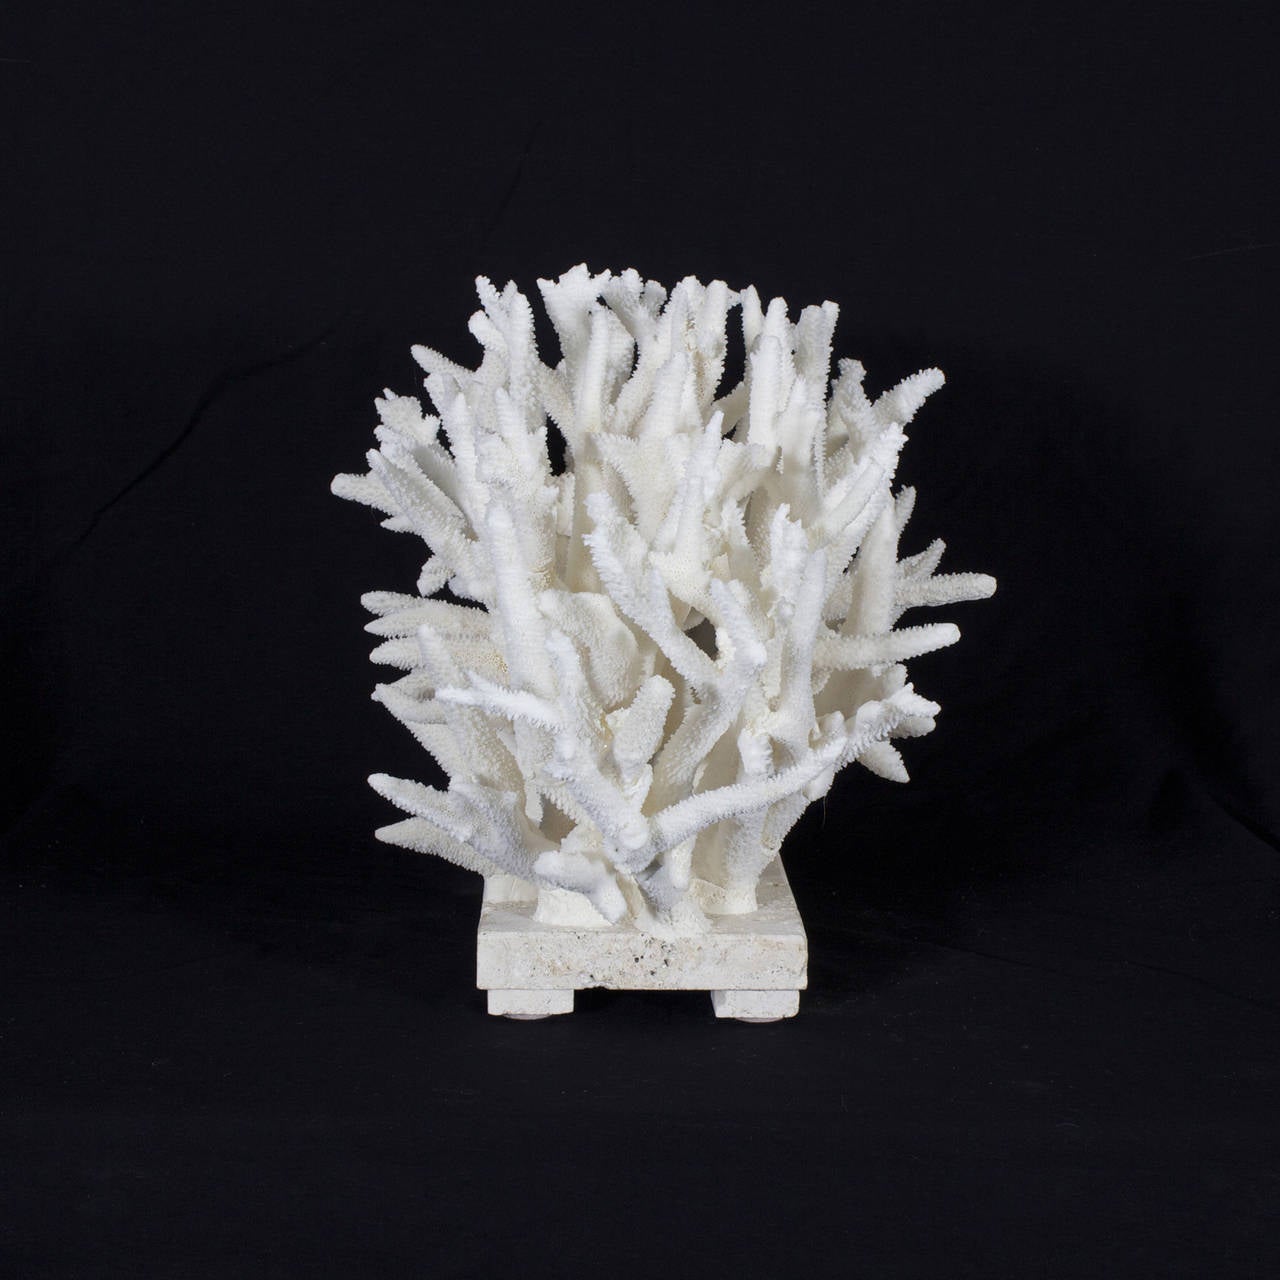 Rustic White Staghorn Coral Sculpture